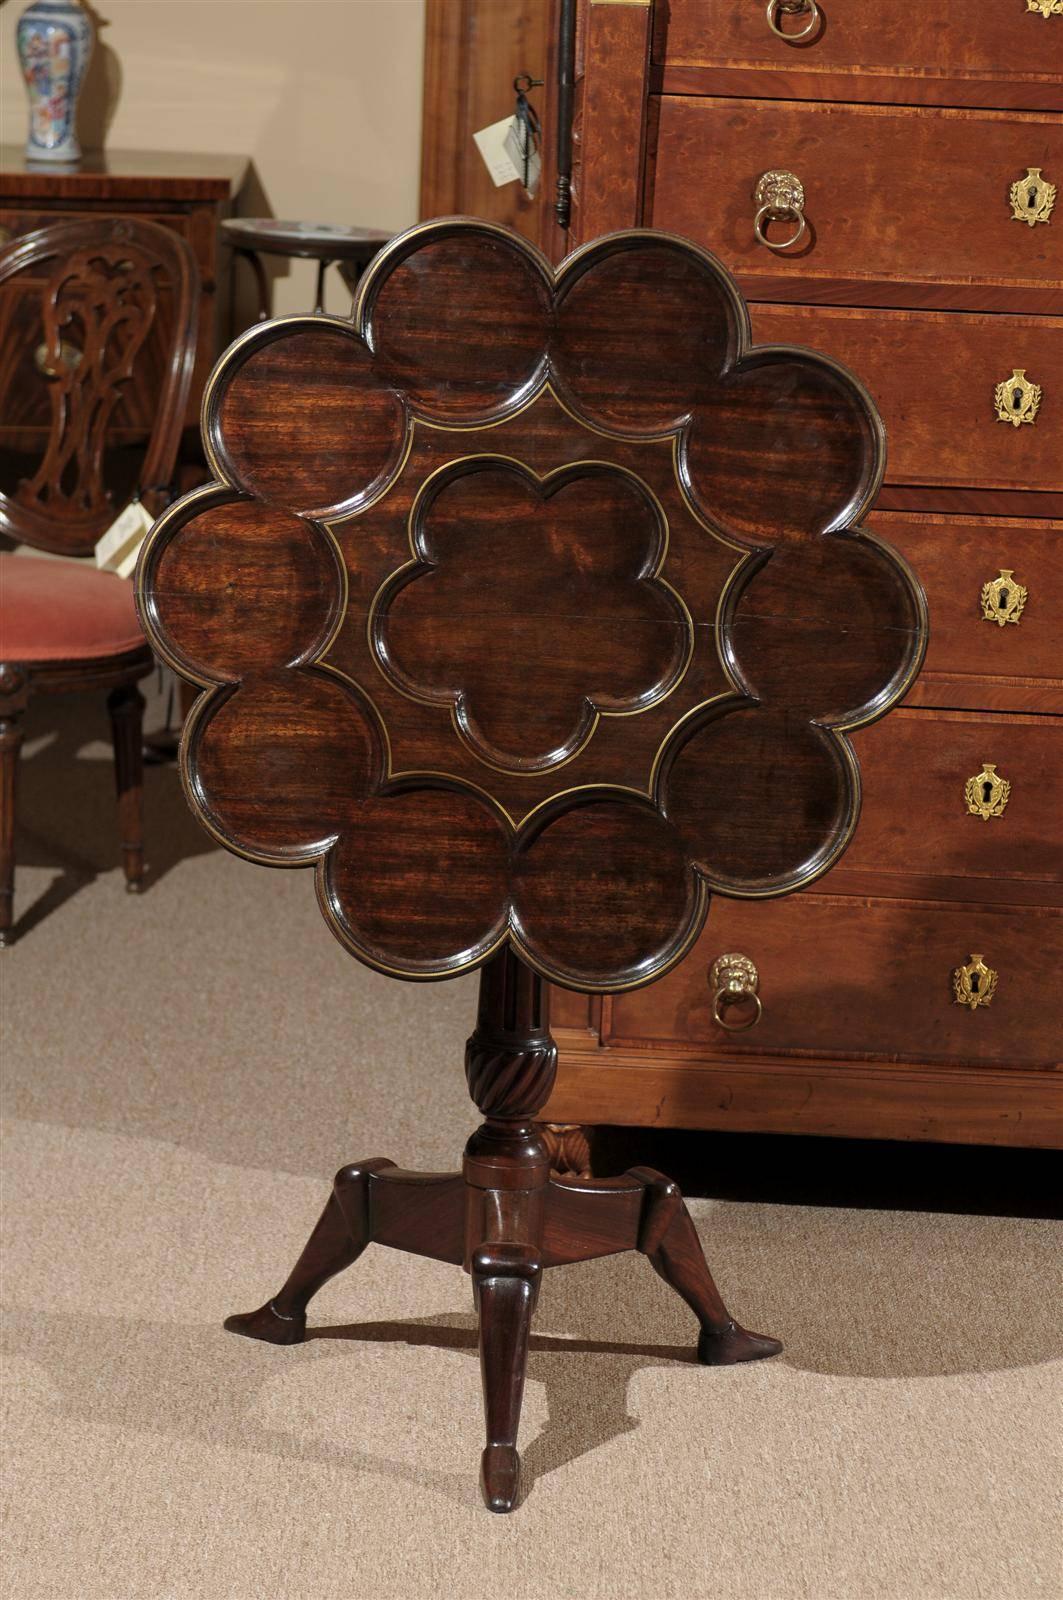 Manx rosewood tilt-top table with ten carved recesses (for tea service) and brass inlay, circa 1890.